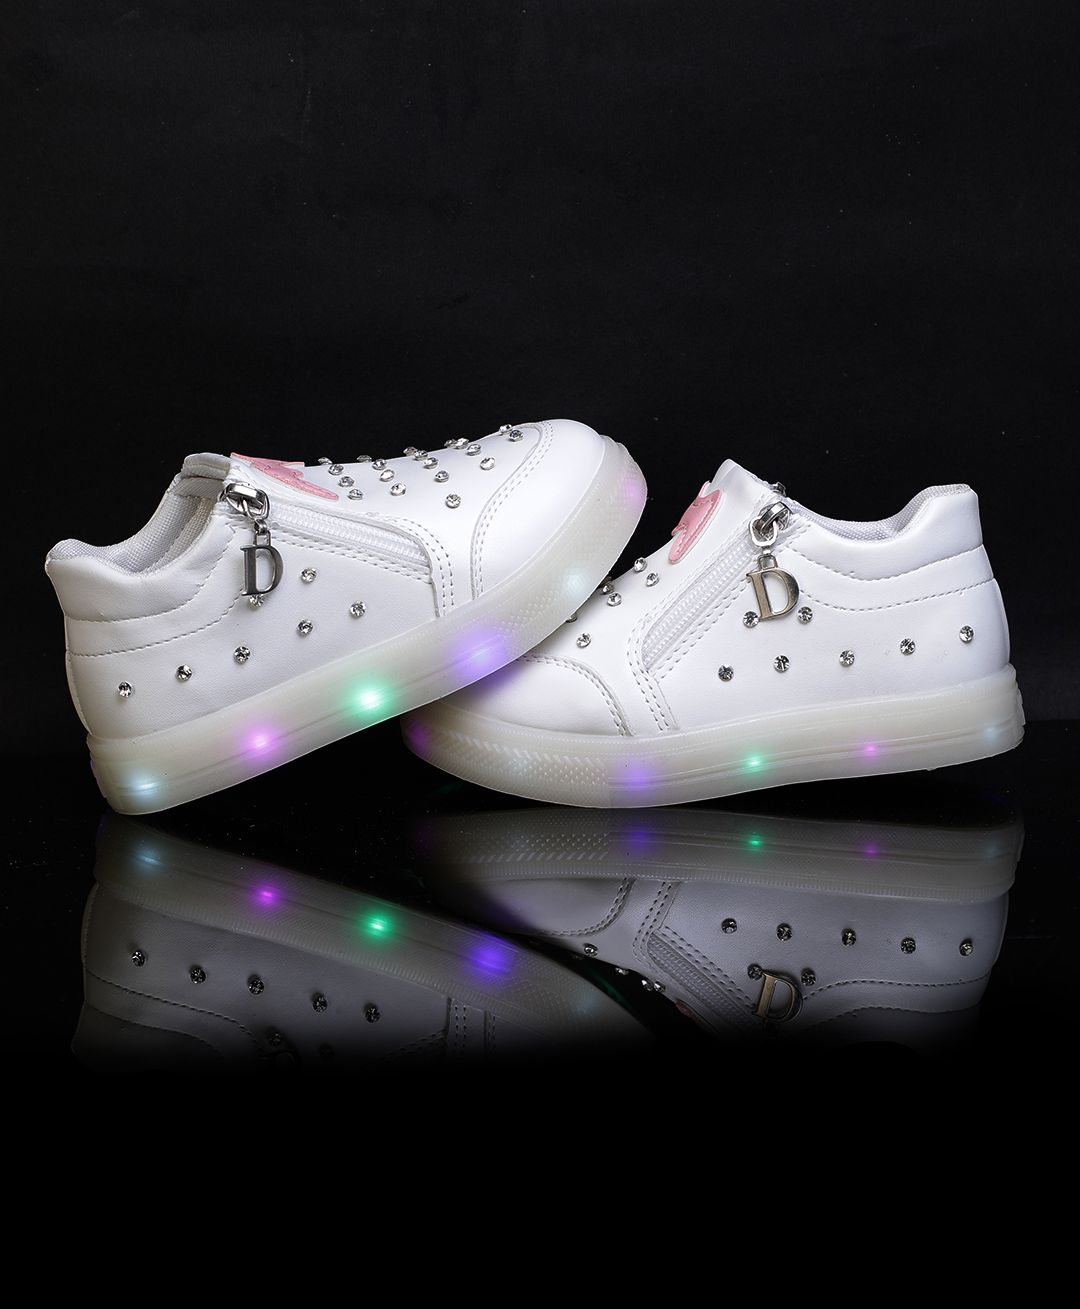 Korea kas Roei uit Buy PASSION PETALS Studded LED Shoes - White for Both (3-3 Years) Online,  Shop at FirstCry.com - 9096597